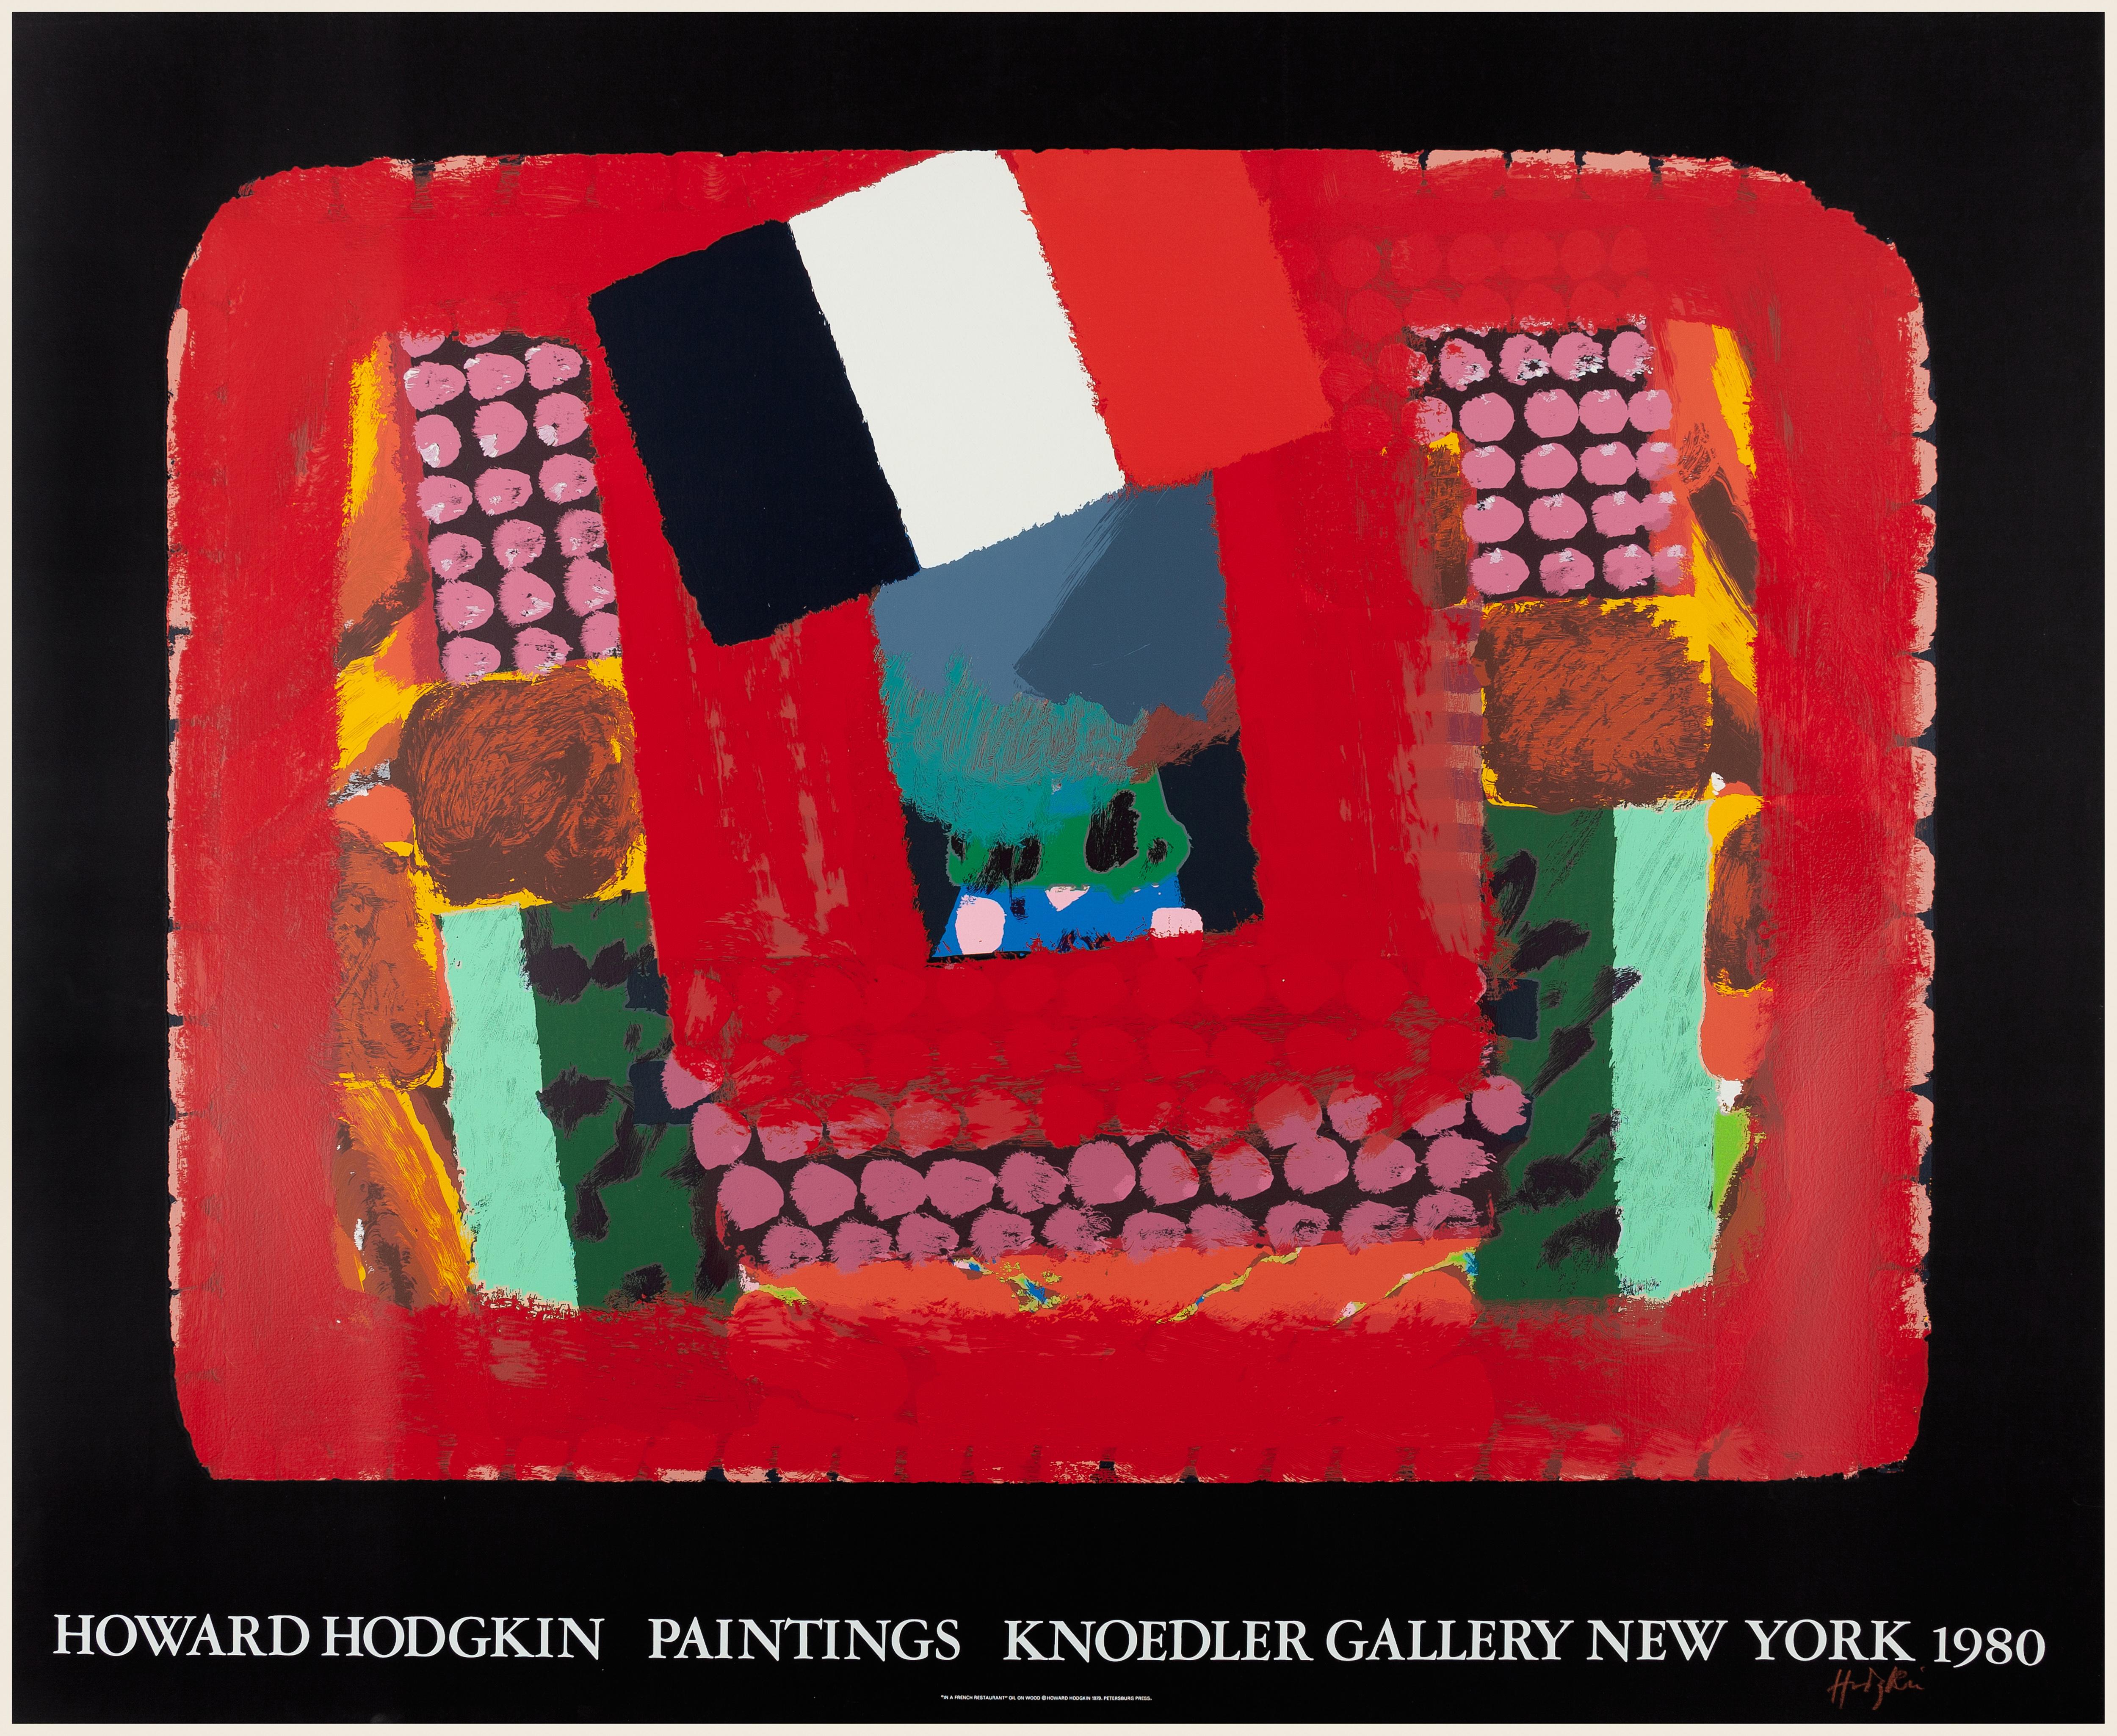 Howard Hodgkin Abstract Print - In a French Restaurant: large scale patterned black and red abstract painting 